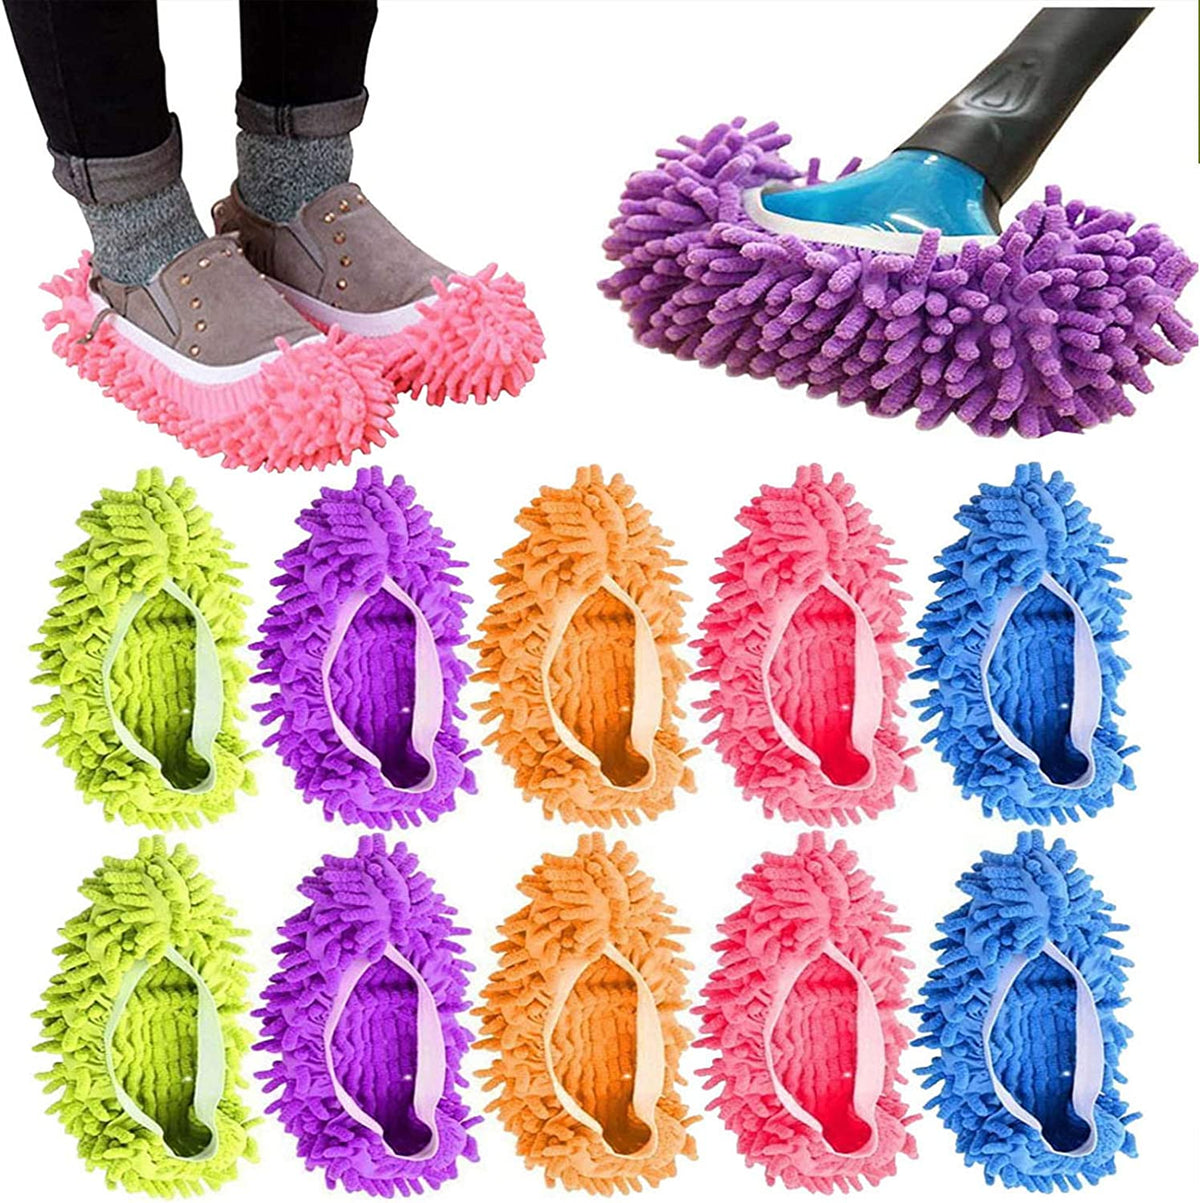 Multifunctional Micro Fiber Slipper Shoe Covers, Floor Dust Cleaning Mop Slippers (Set of 2)- Assorted Colors